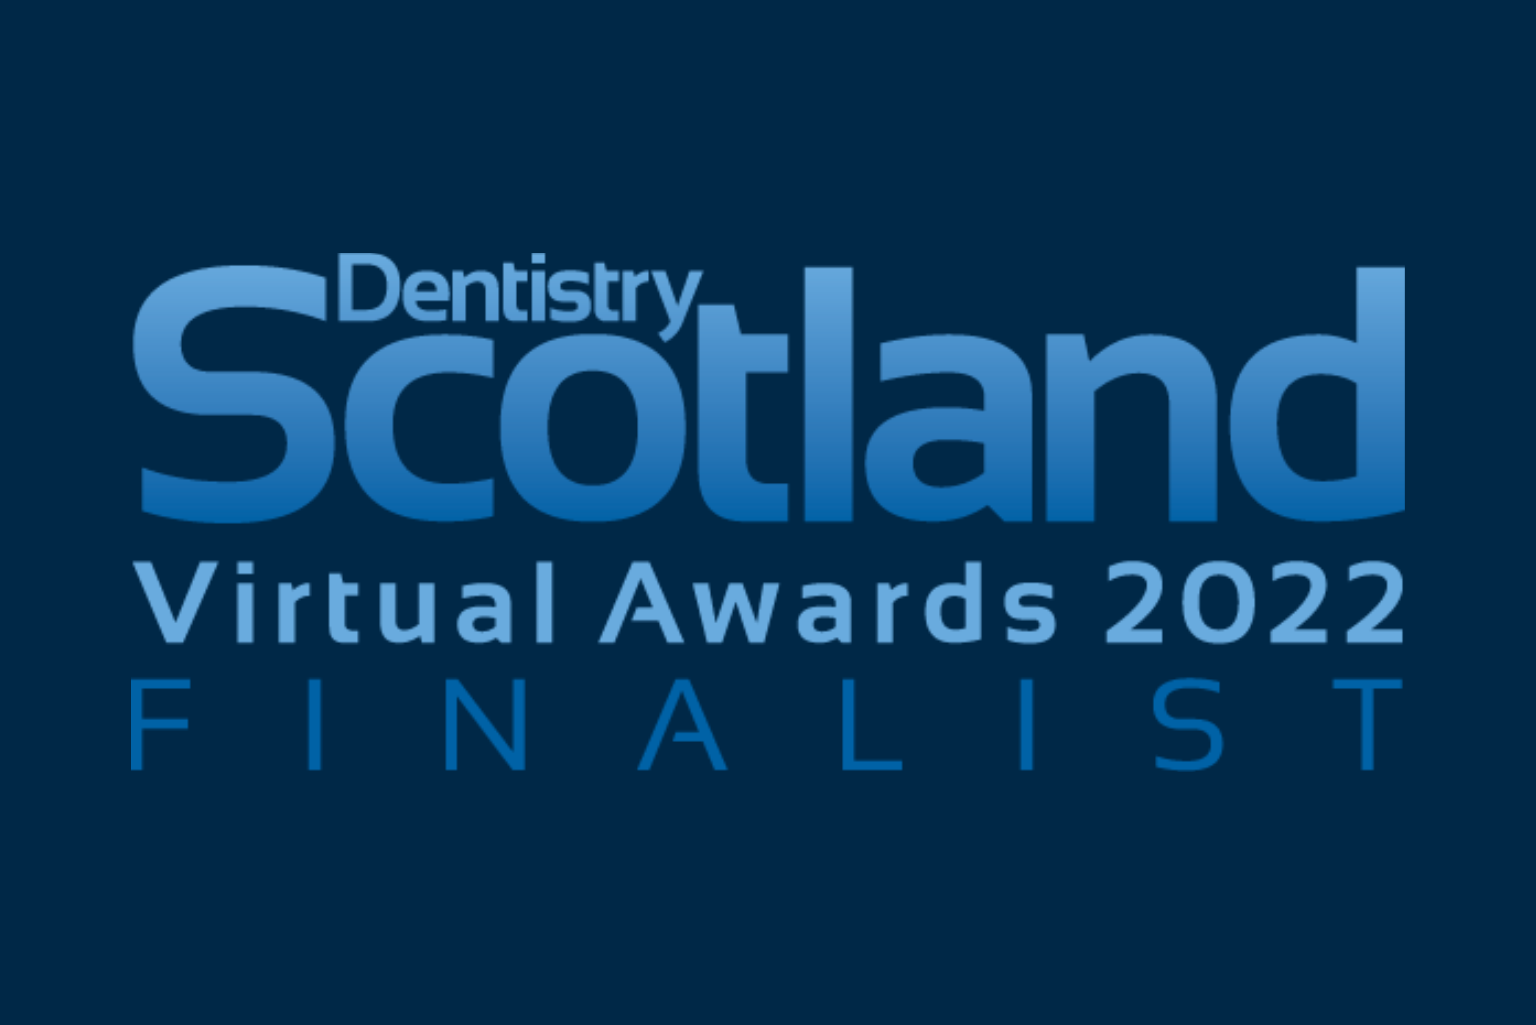 We can finally reveal the full list of finalists for the 2022 Dentistry Scotland Awards – check to see if you made it!